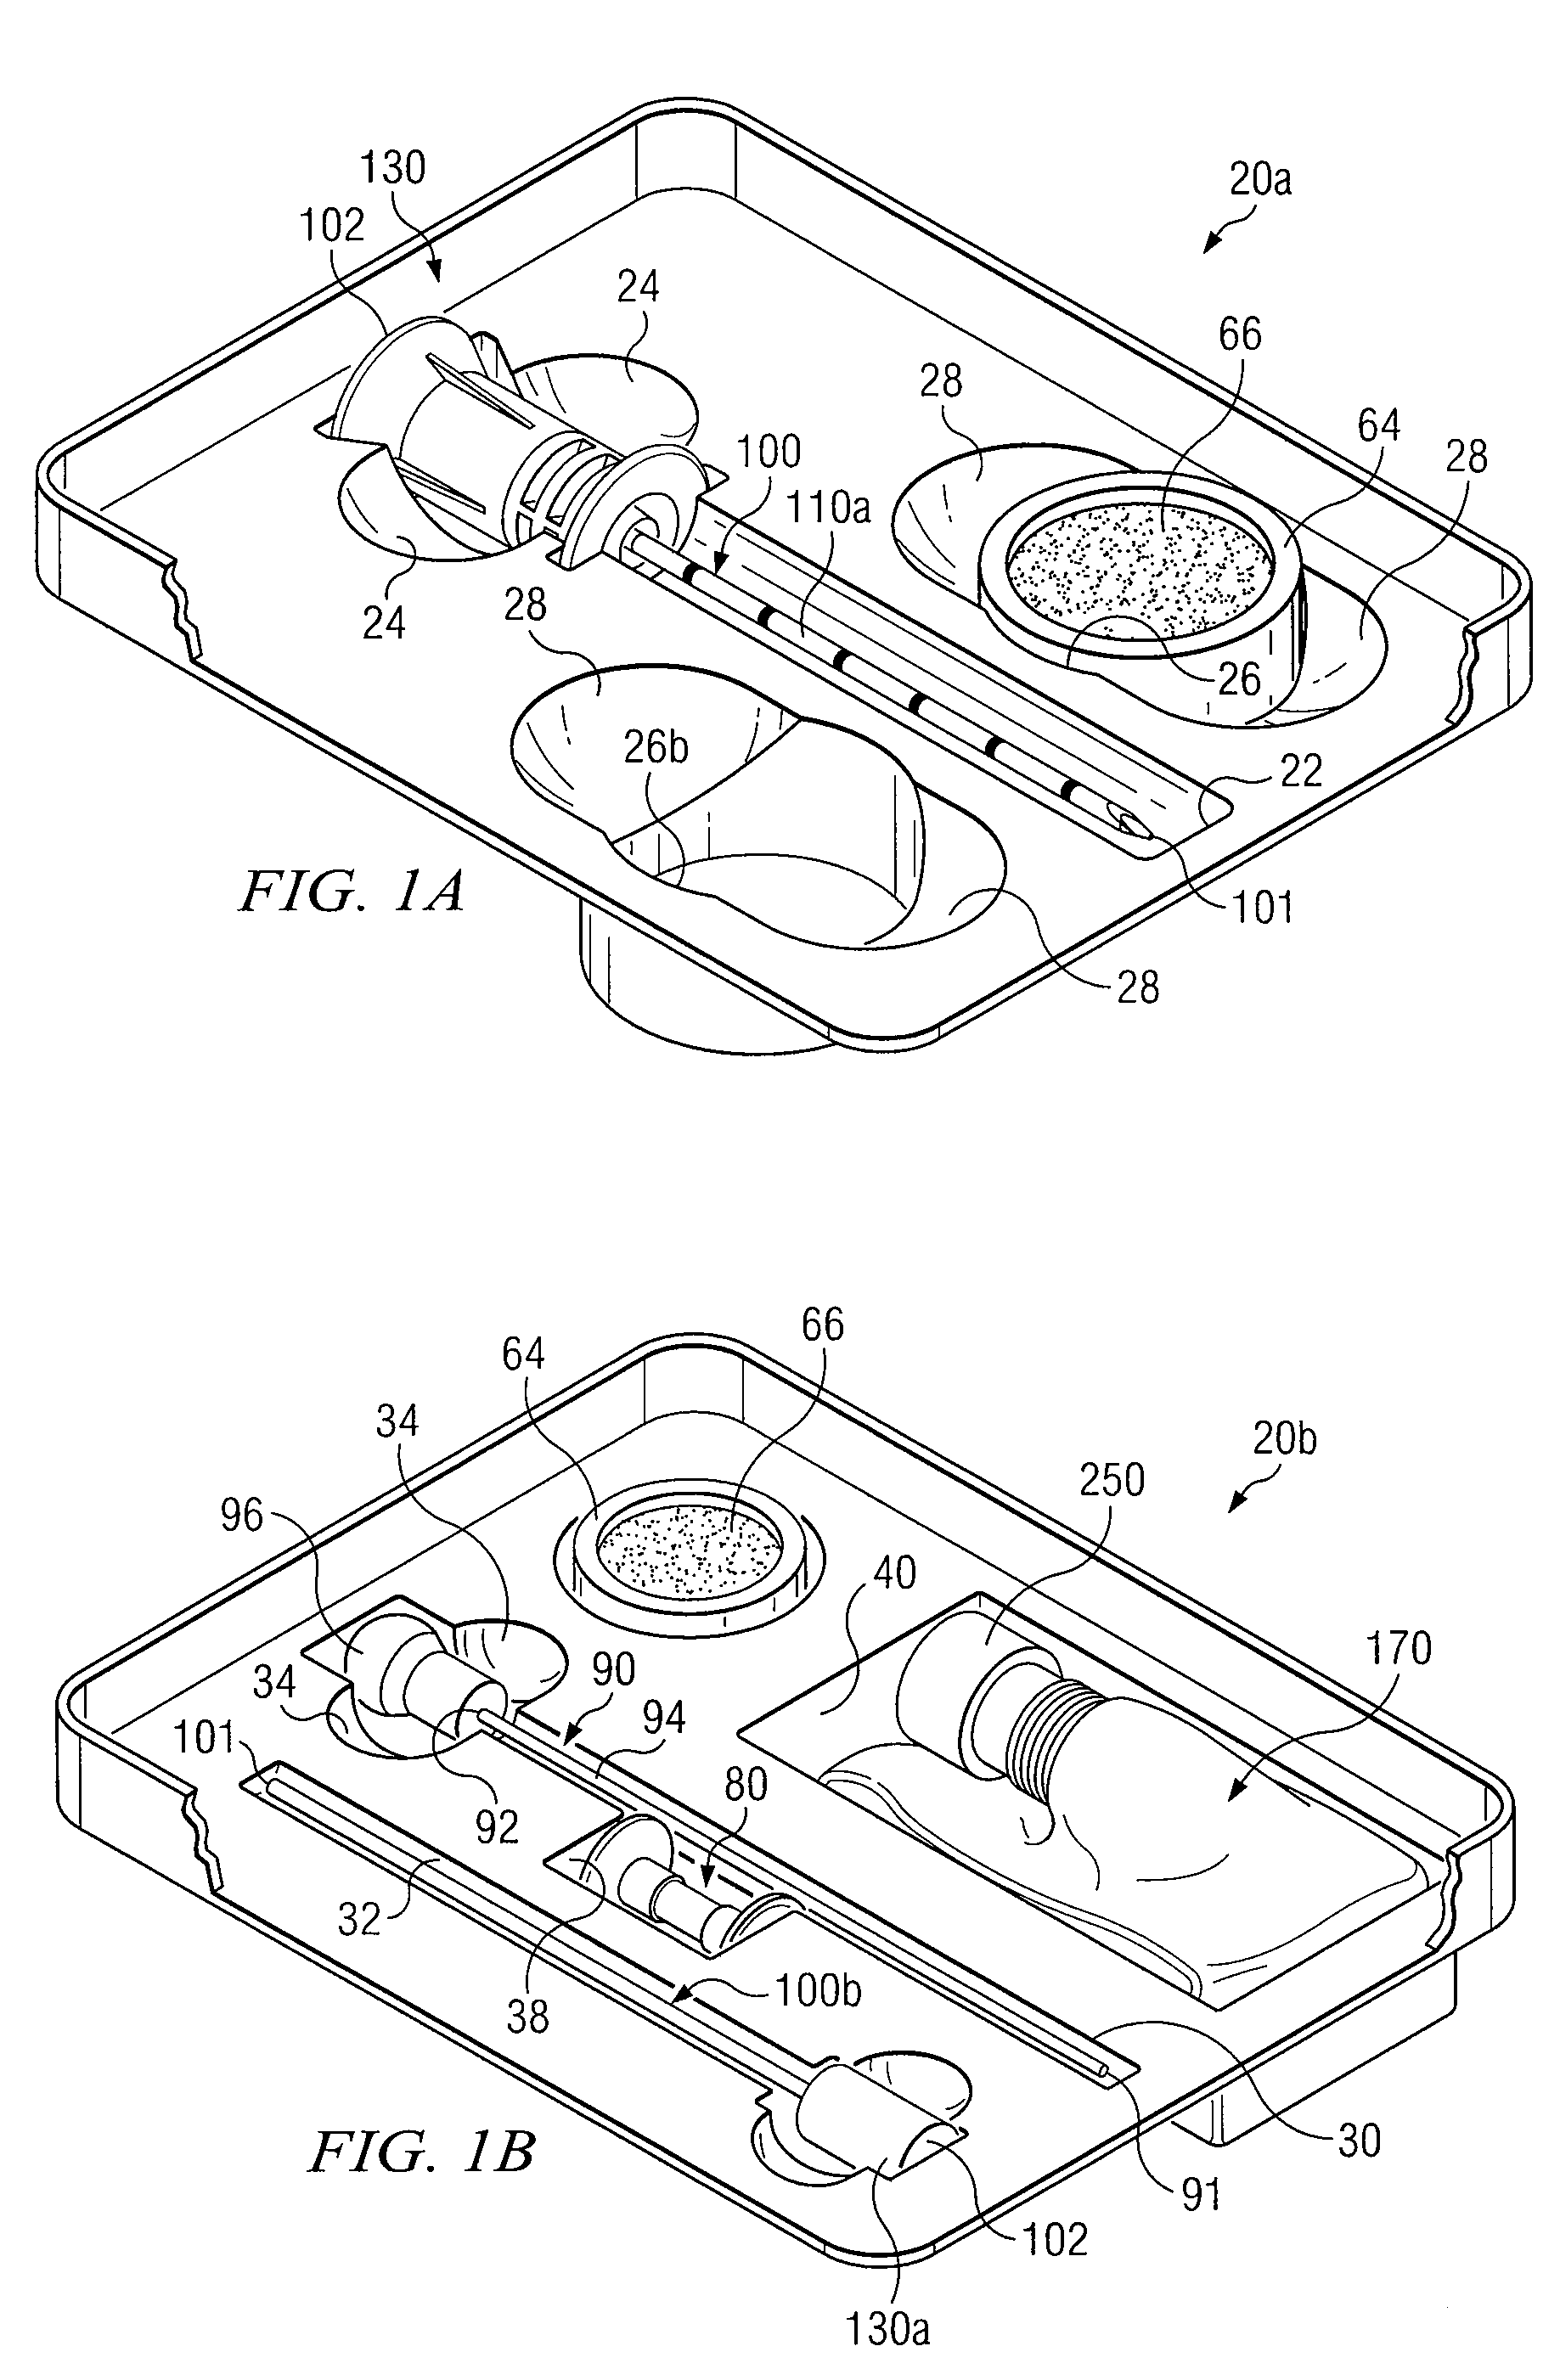 Biopsy devices and related methods